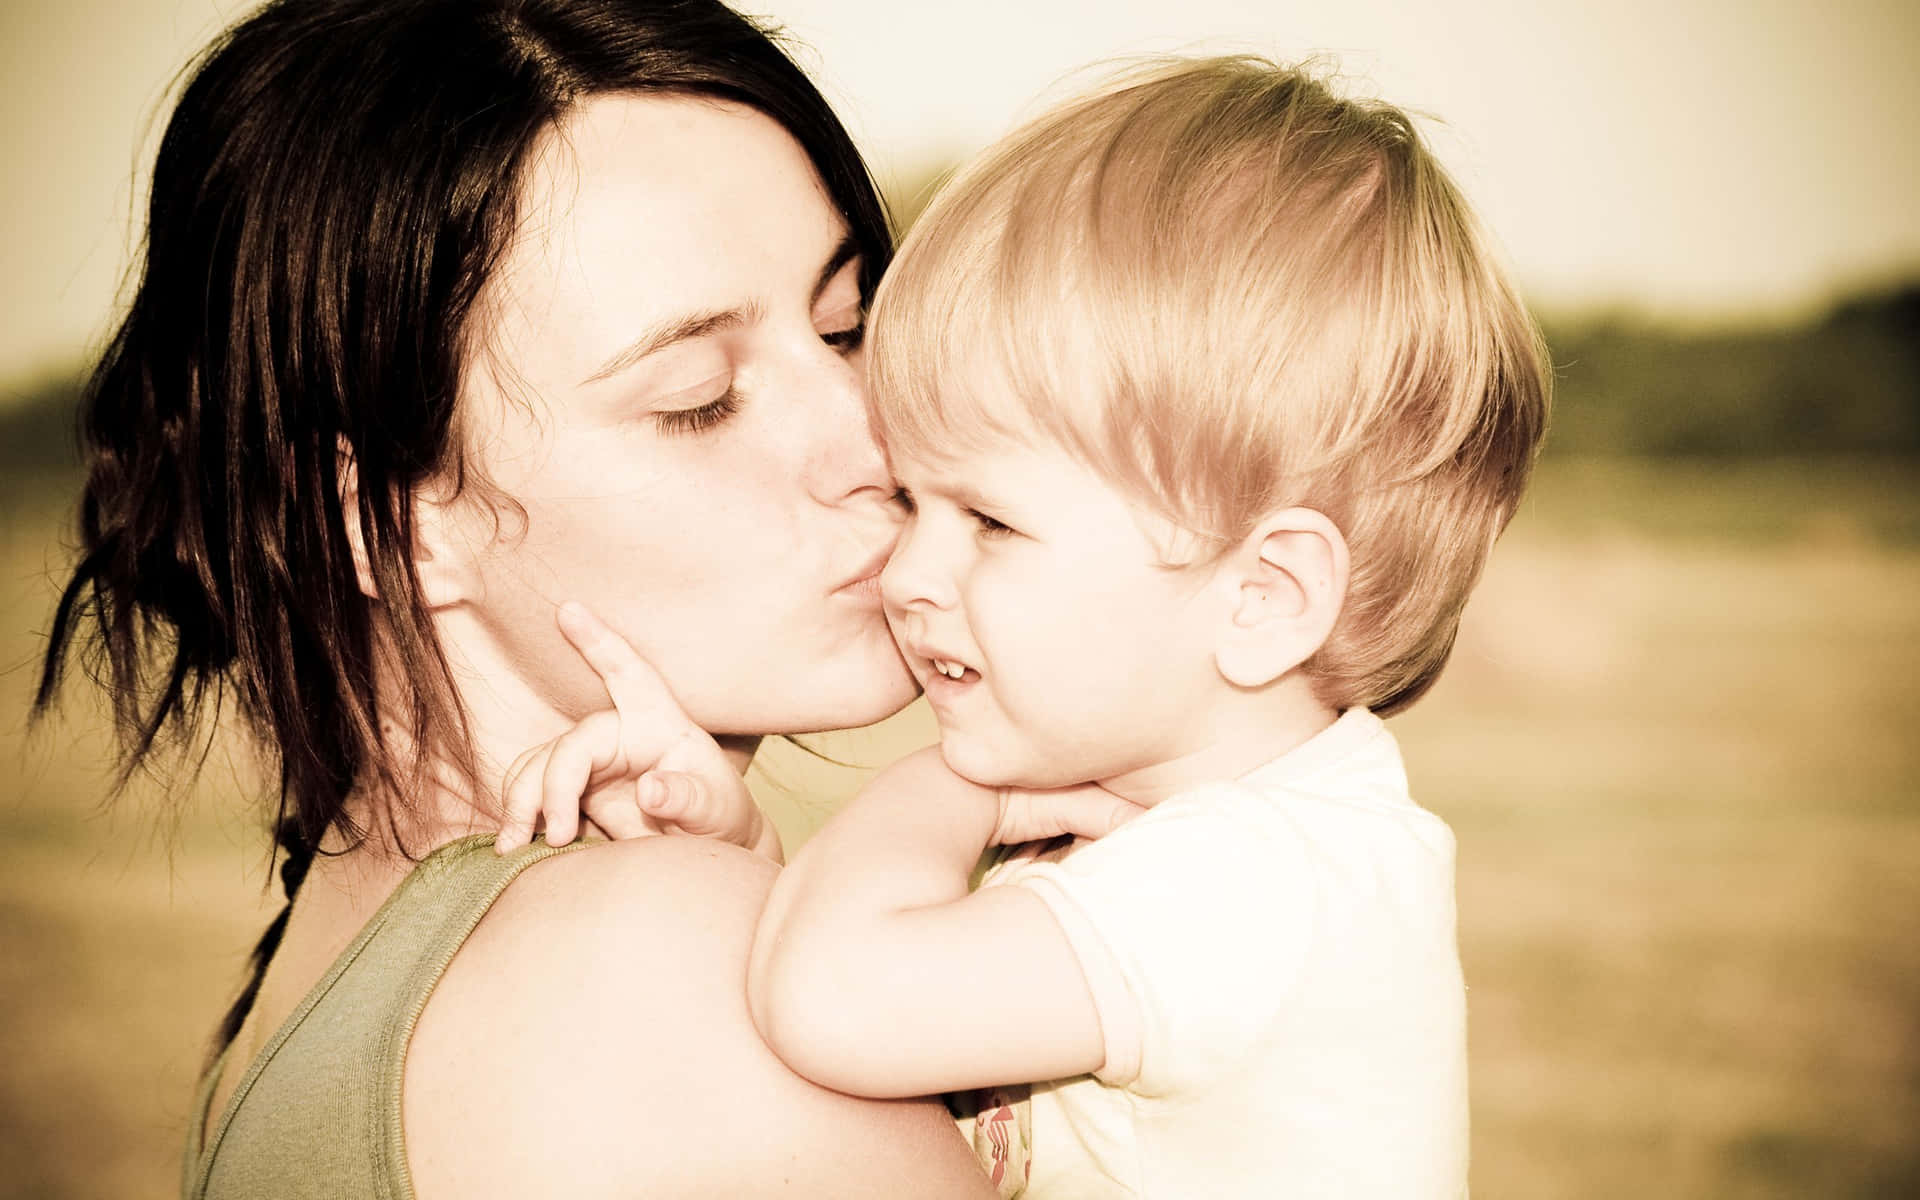 A Woman Kissing Her Child In A Field